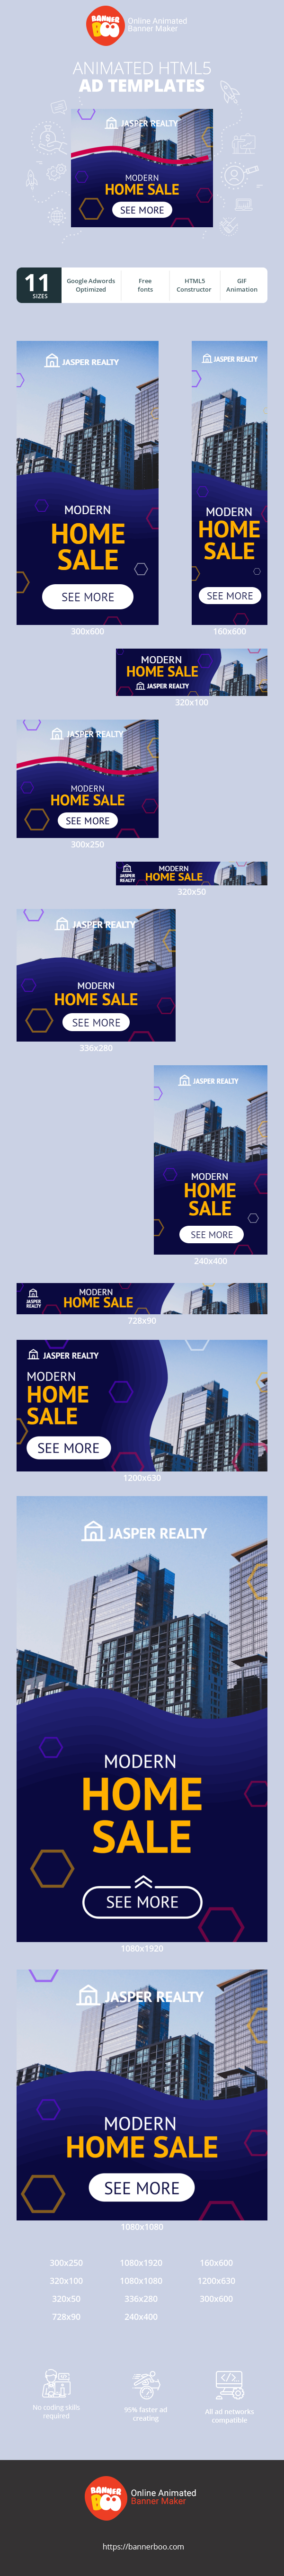 Banner ad template — Modern Home Sale — Real Estate